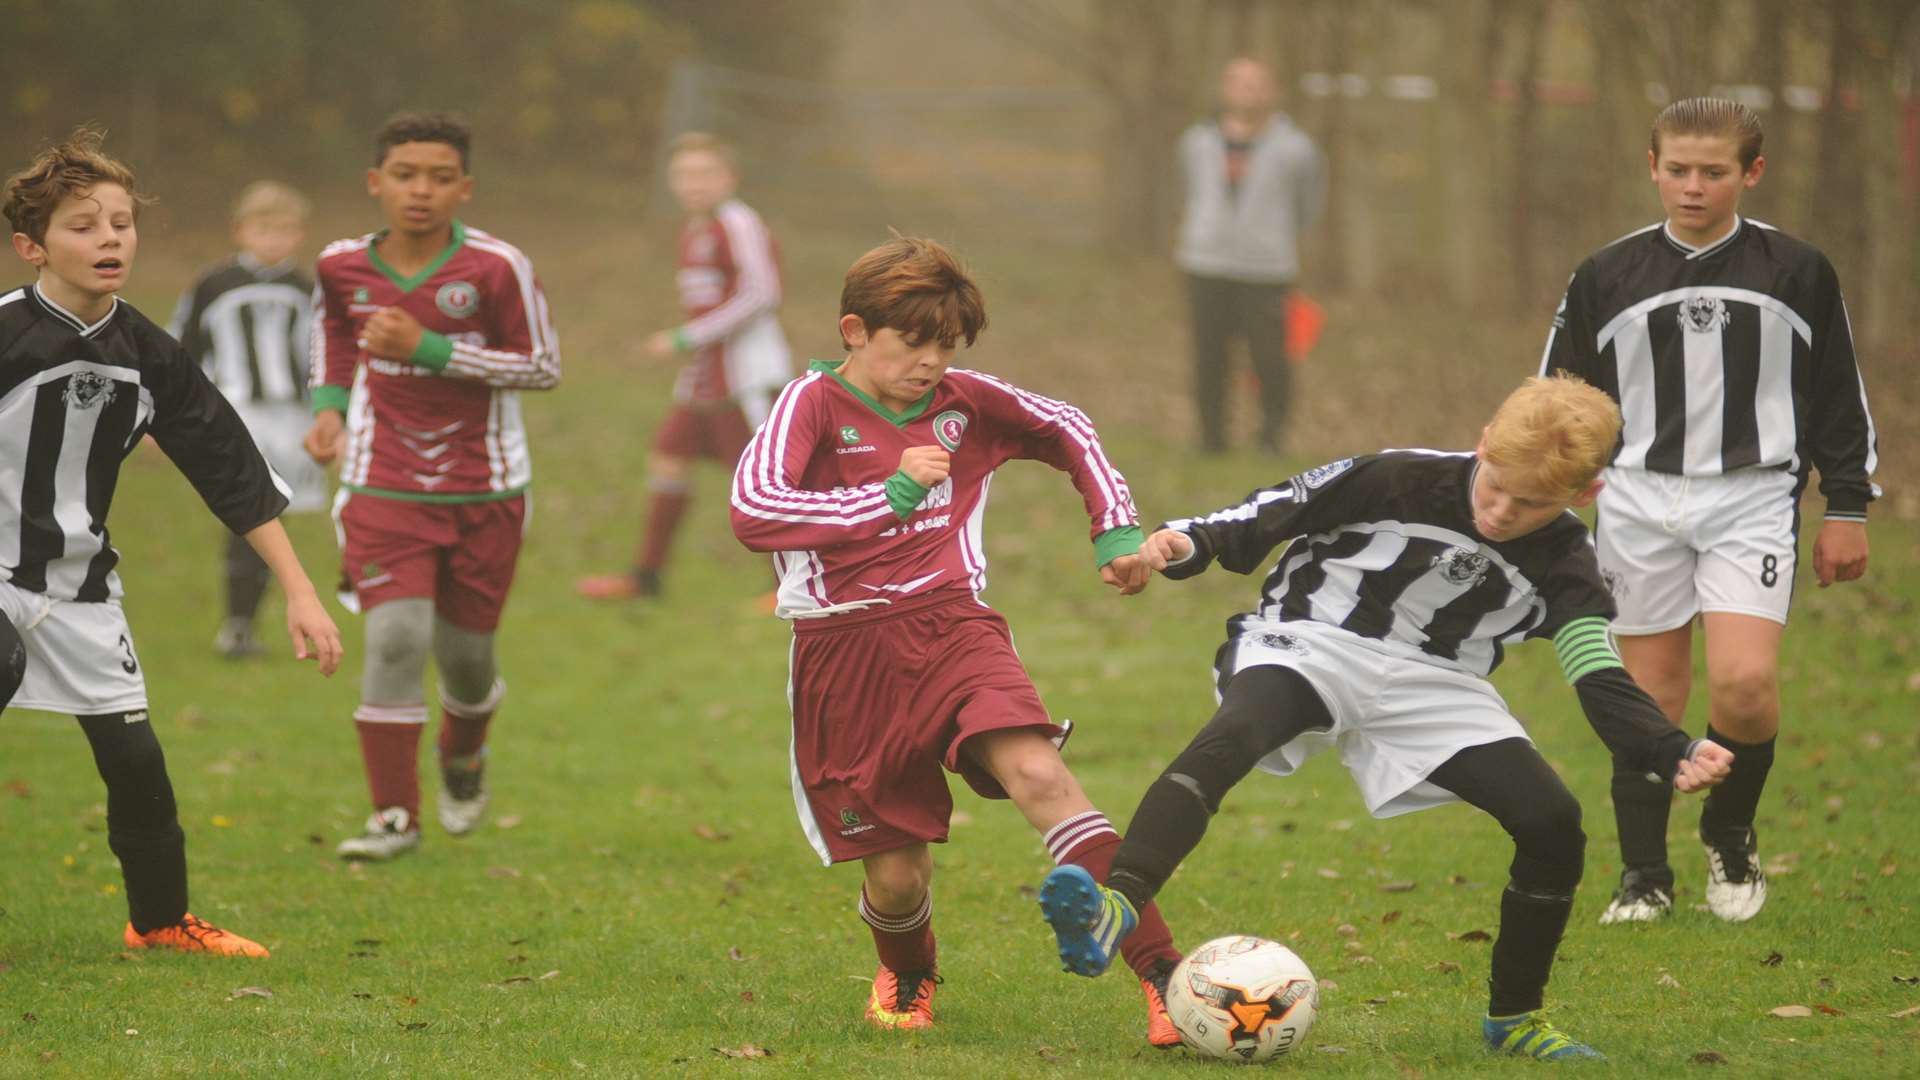 Cobham Colts and Milton & Fulston under-13s go head-to-head in Division 2 Picture: Steve Crispe